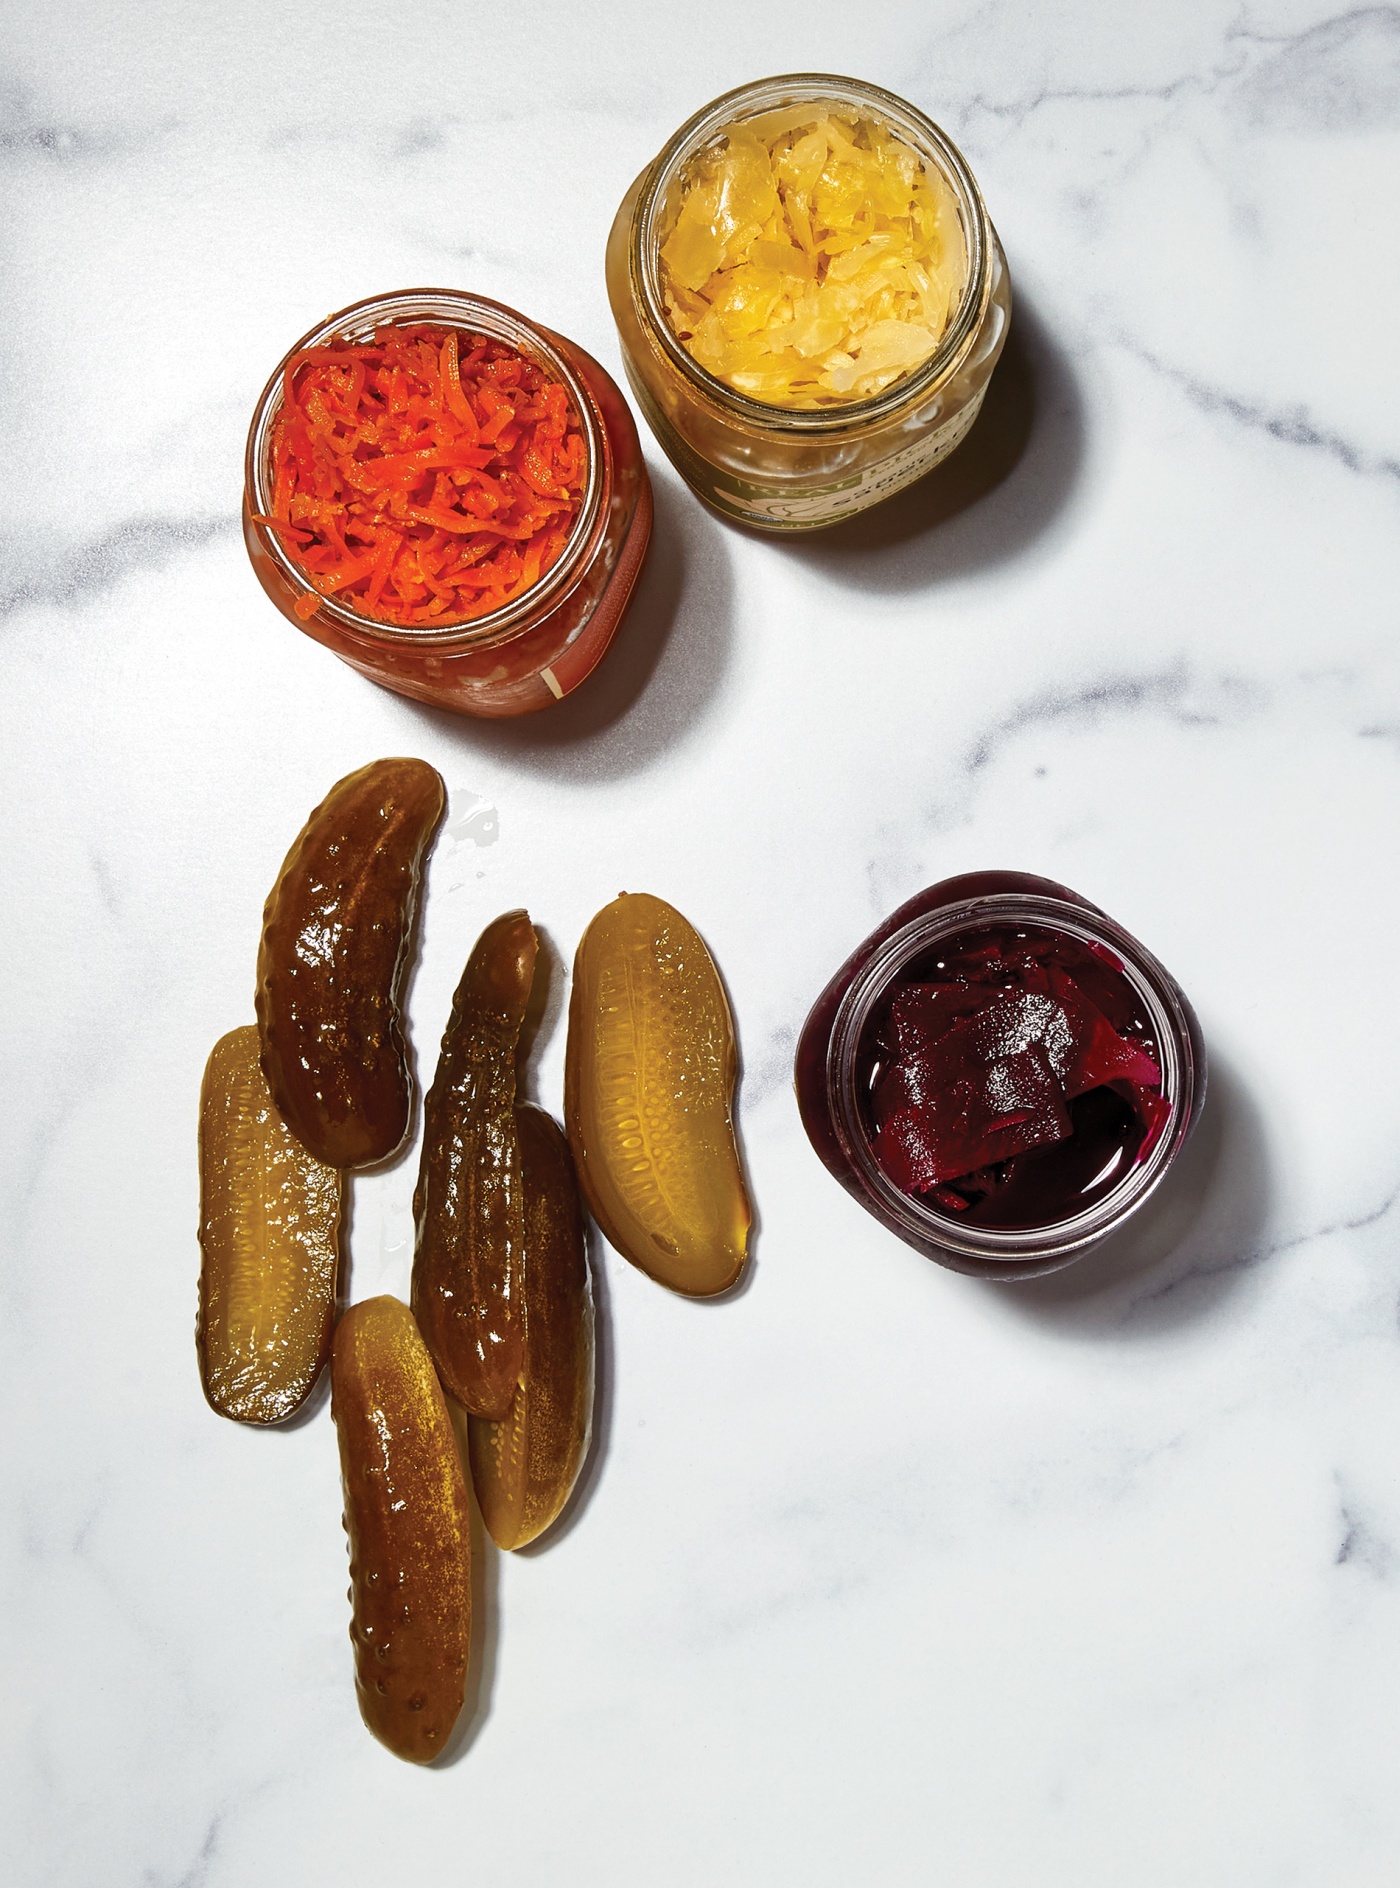 Photo of pickled items